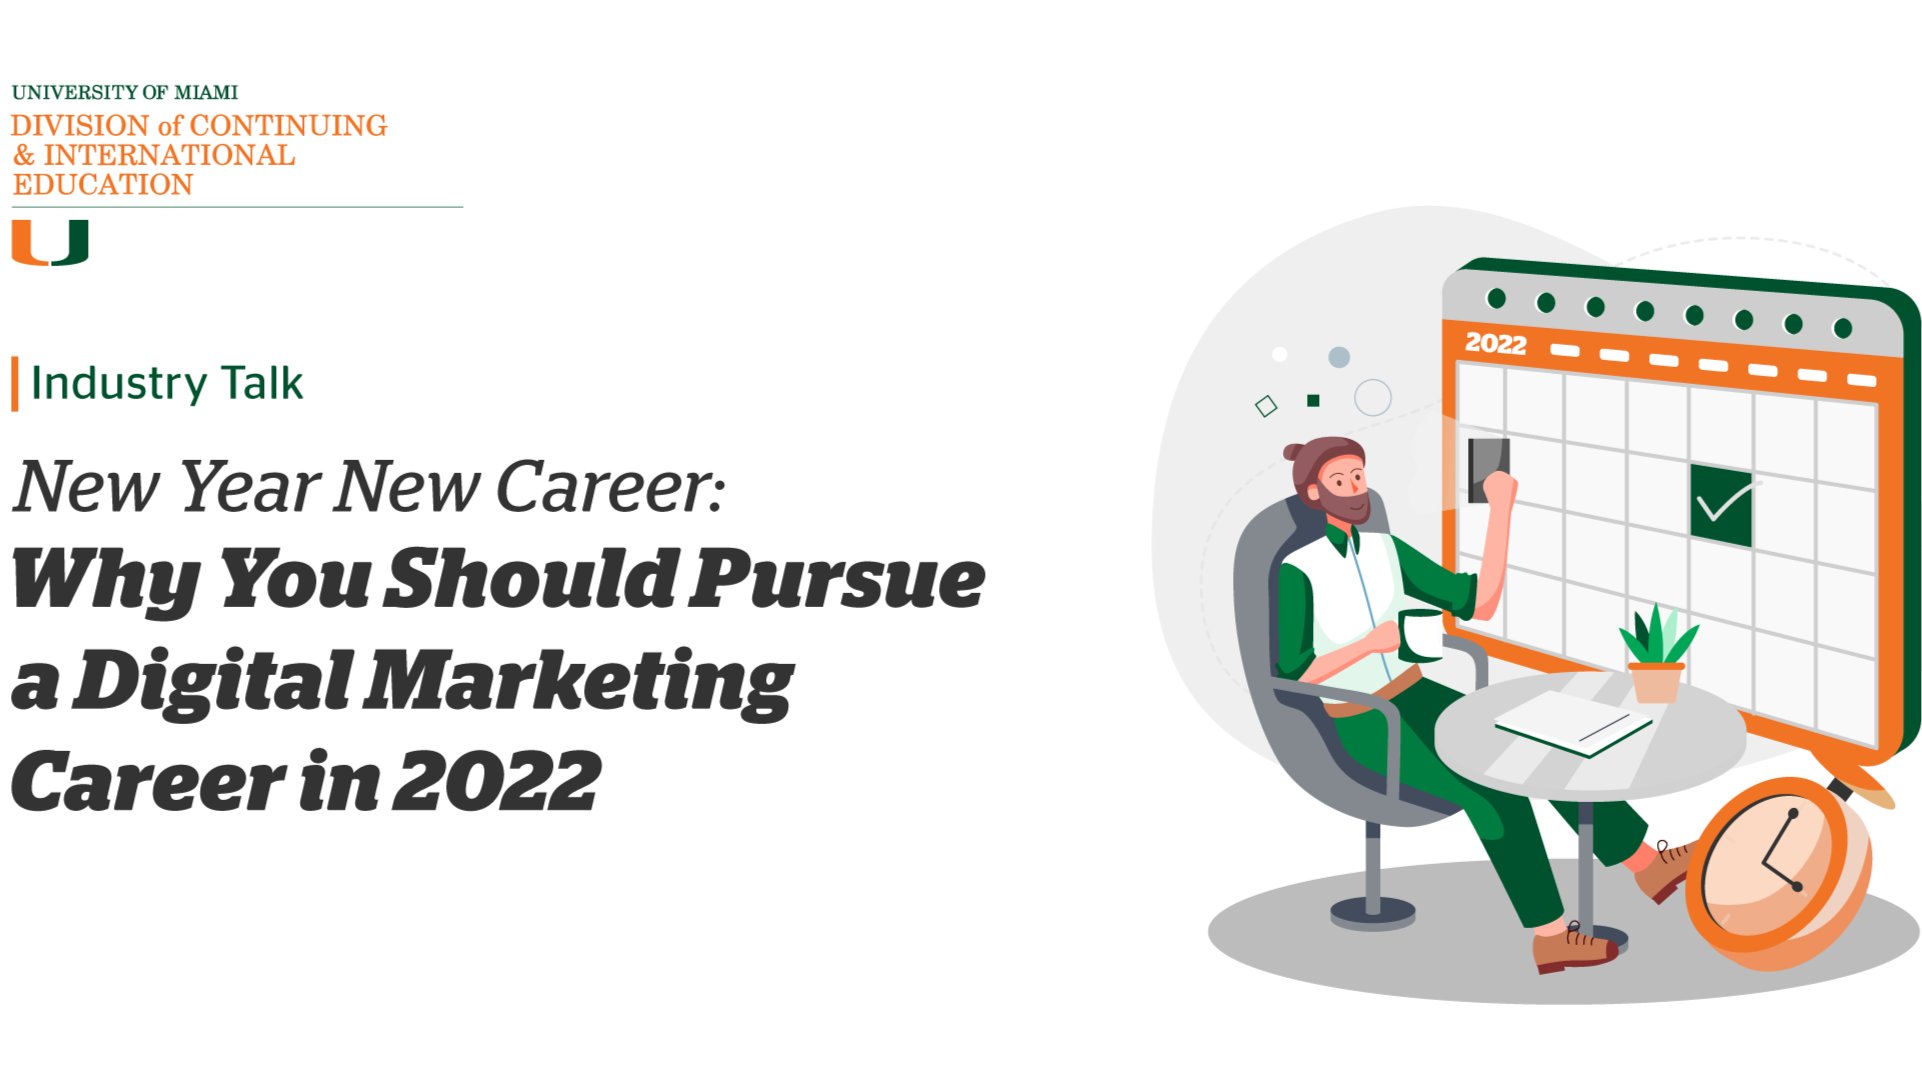 New Year New Career: Why You Should Pursue a Digital Marketing Career in 2022